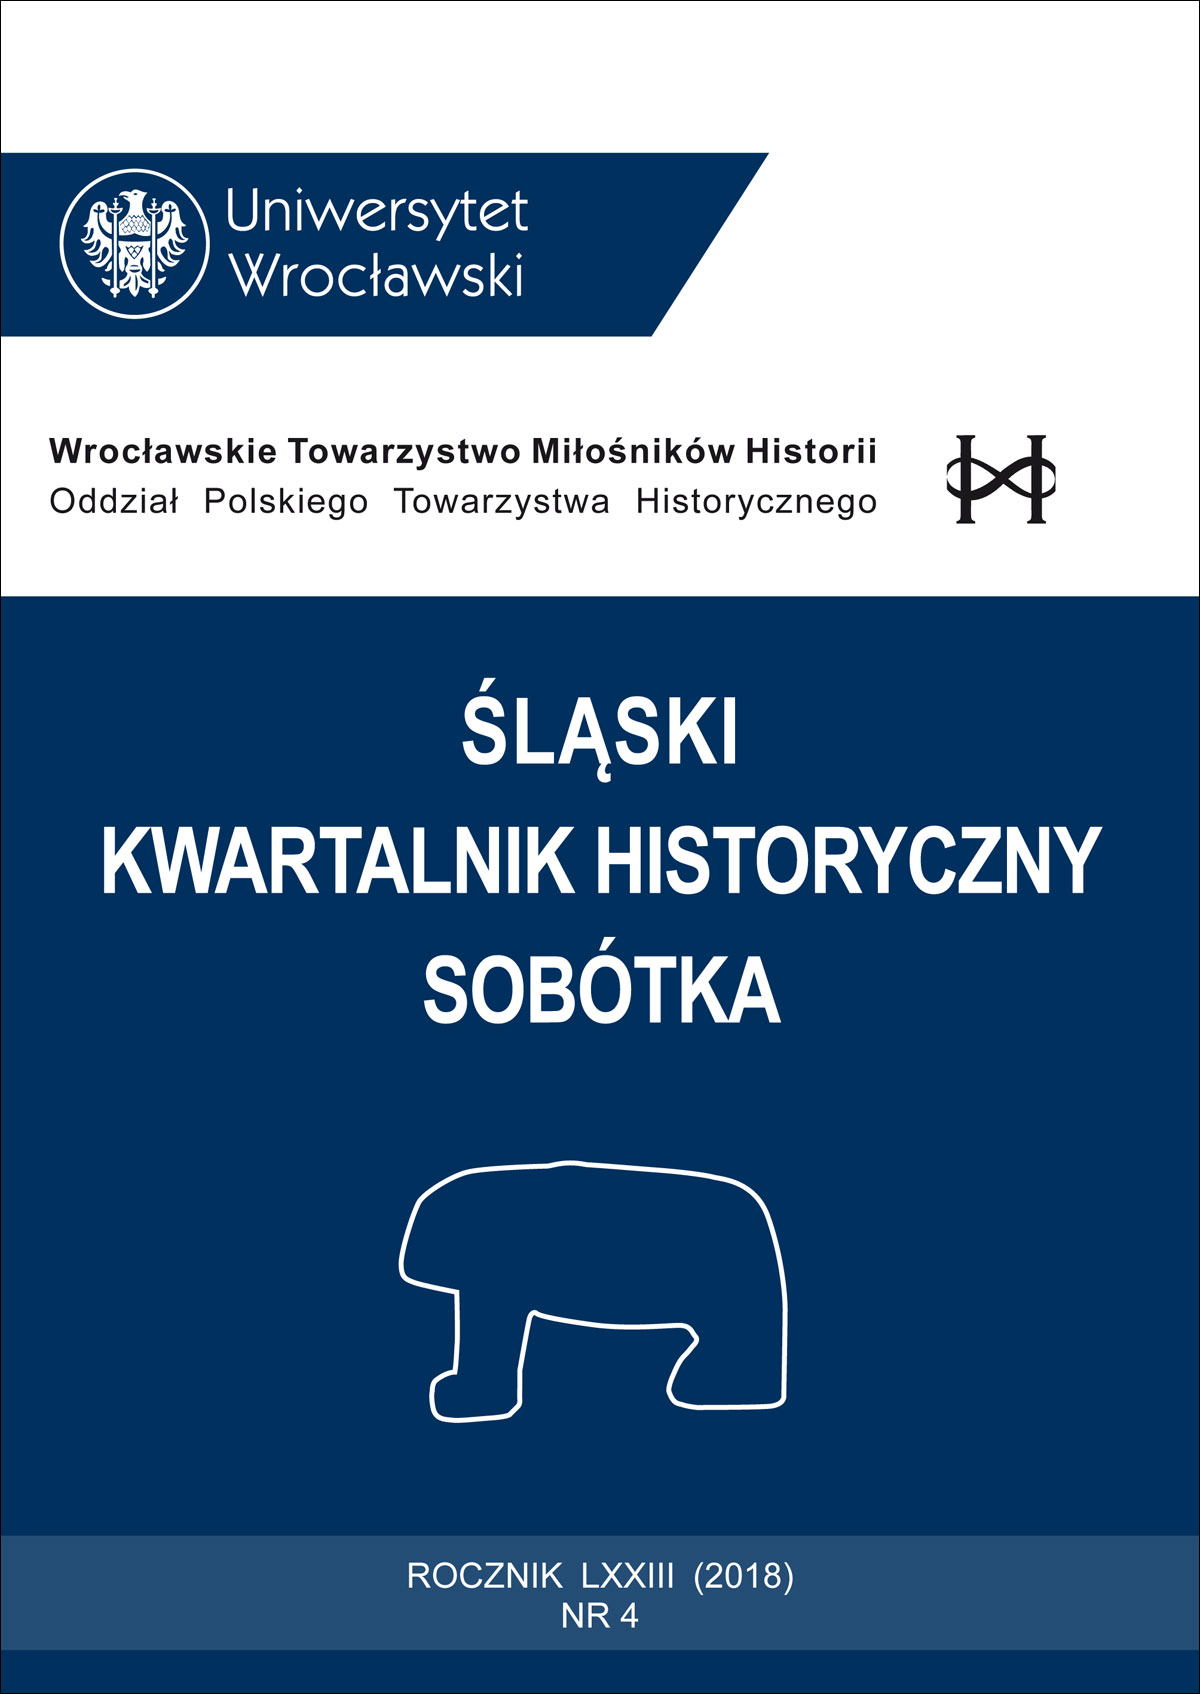 The latest publications on the history of Silesia Cover Image